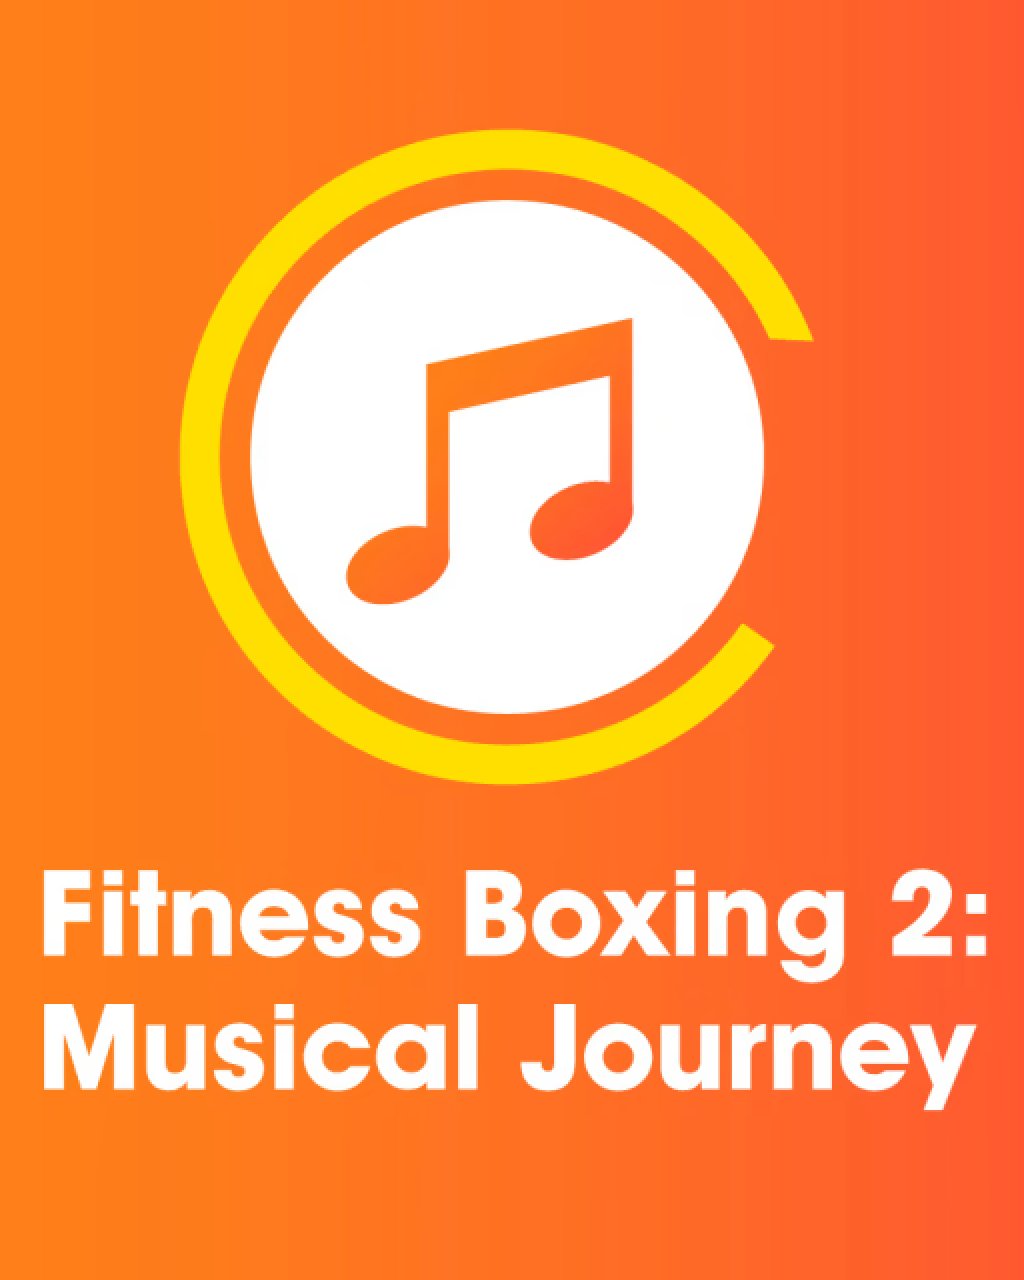 Fitness Boxing 2 Musical Journey